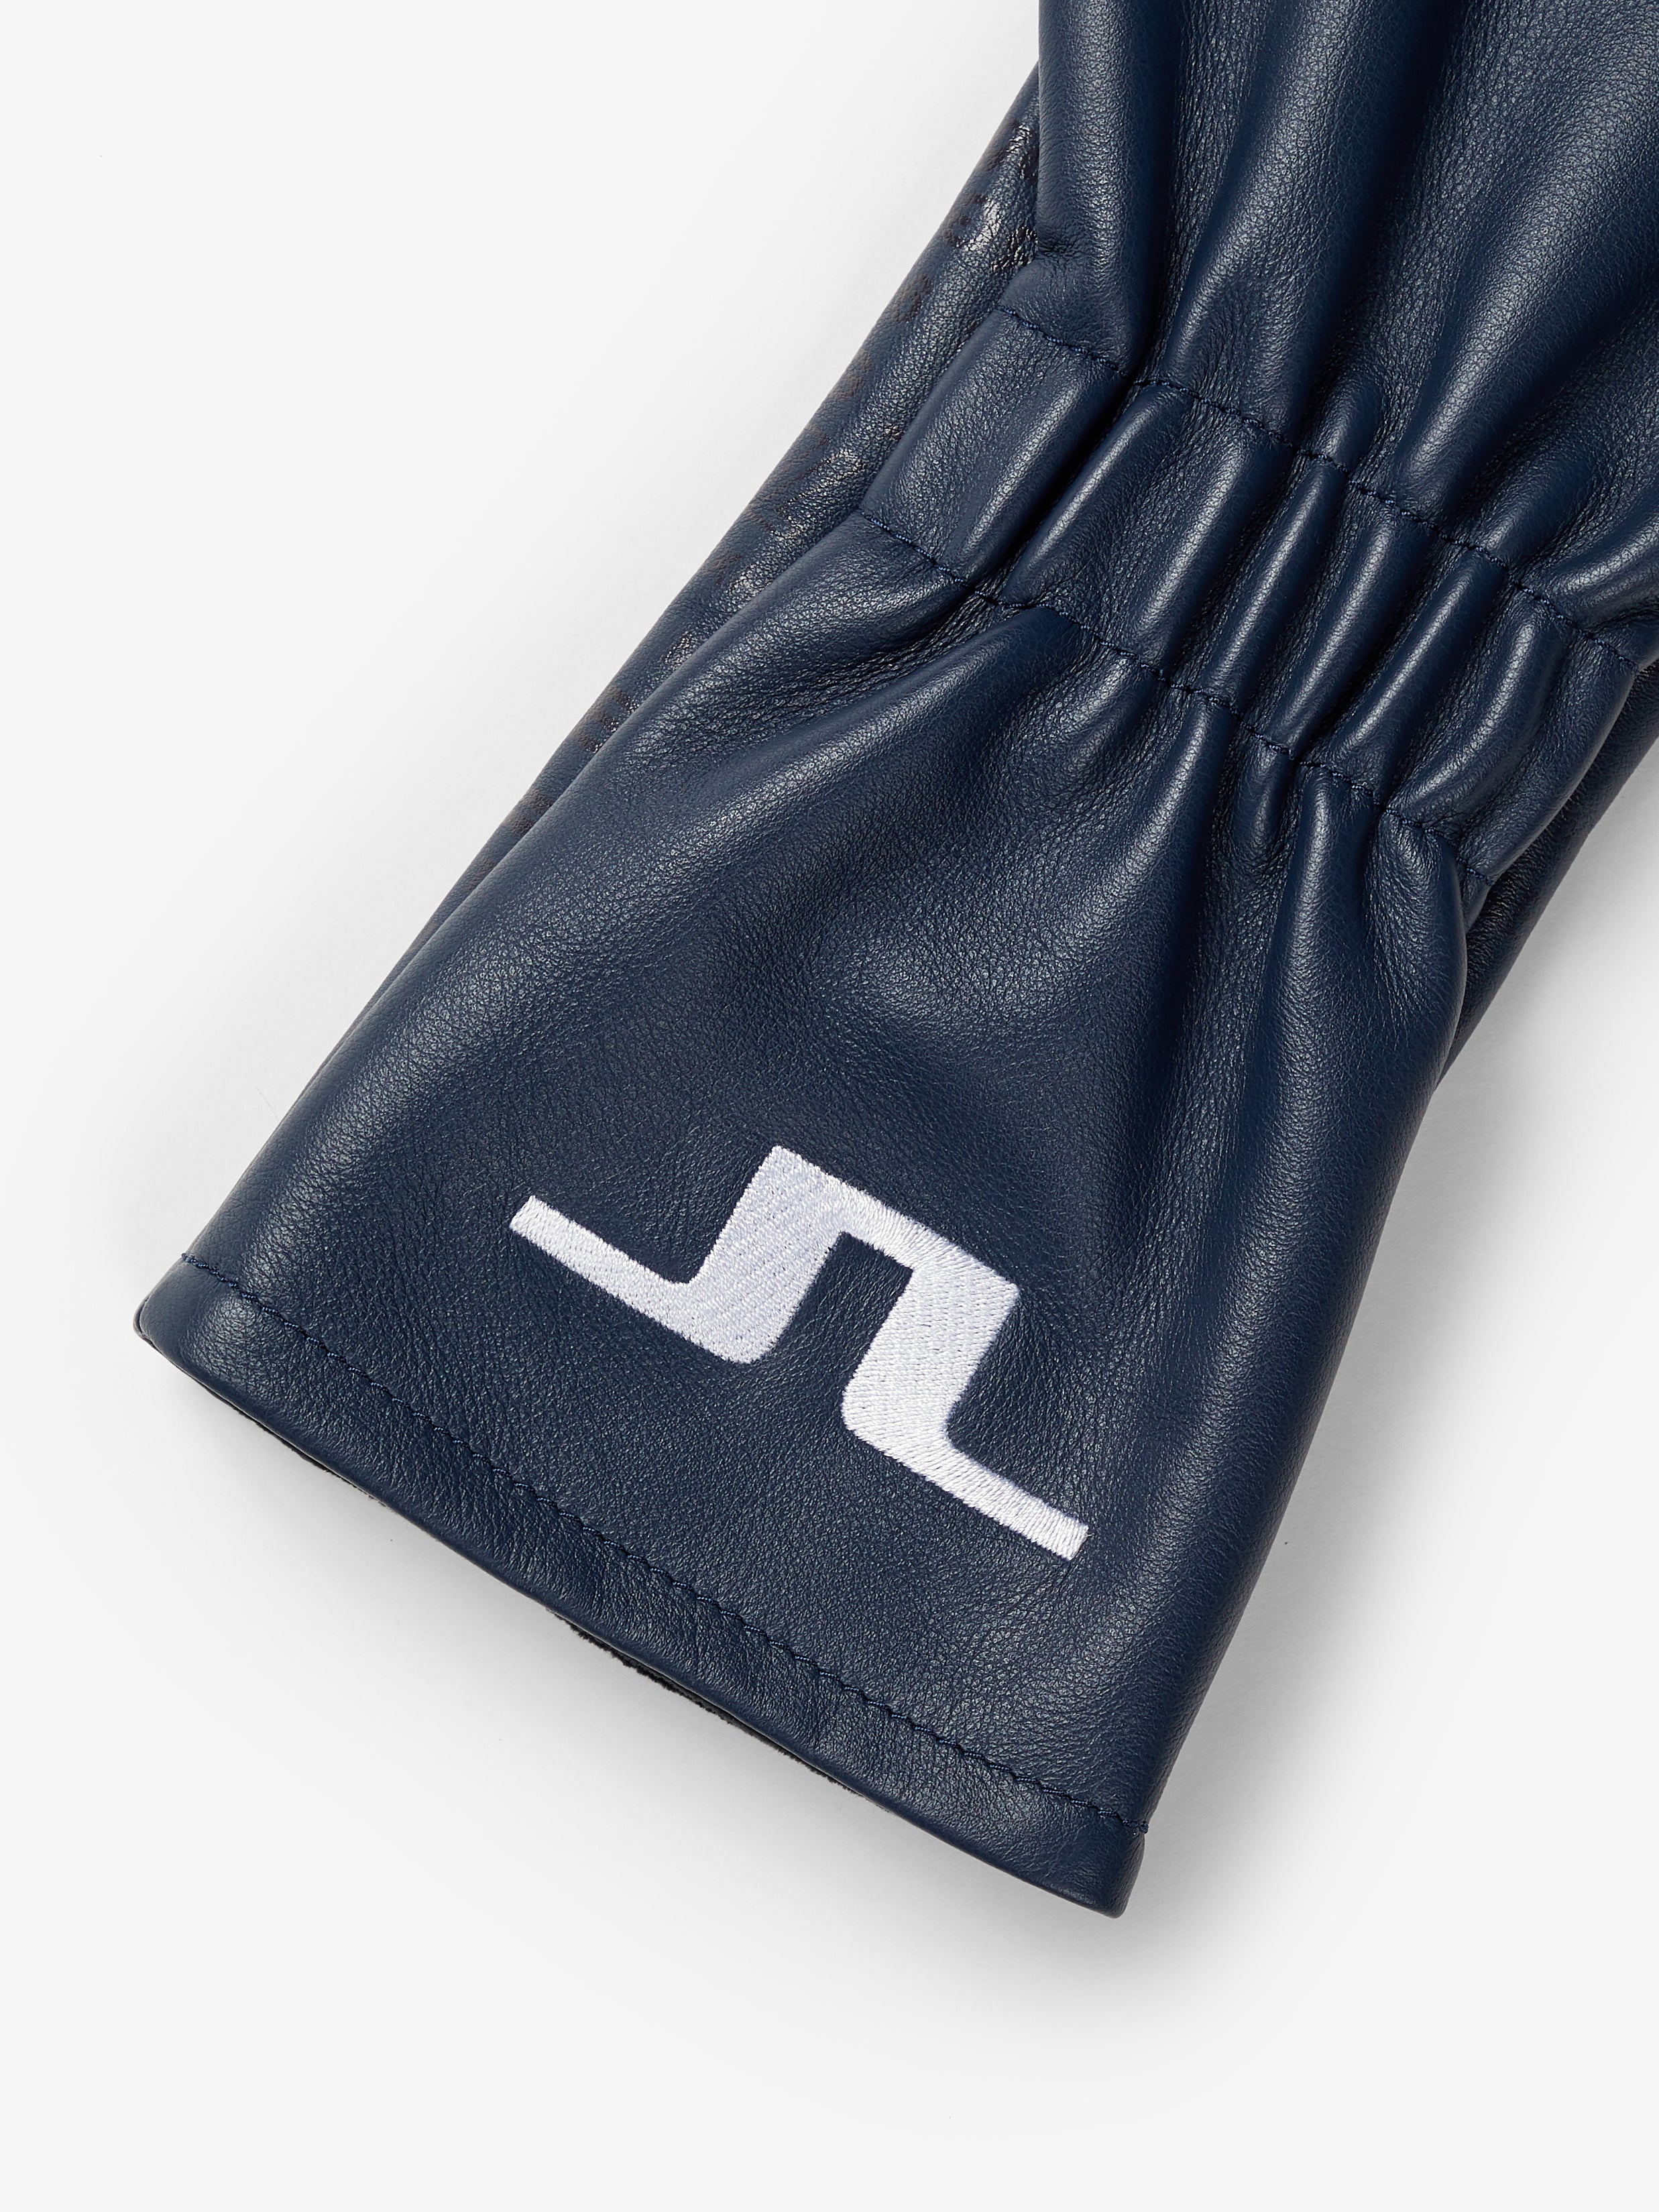 NAVY ARCHIVE PRINT 'Driver Club' Headcover - UNISEX / AW20